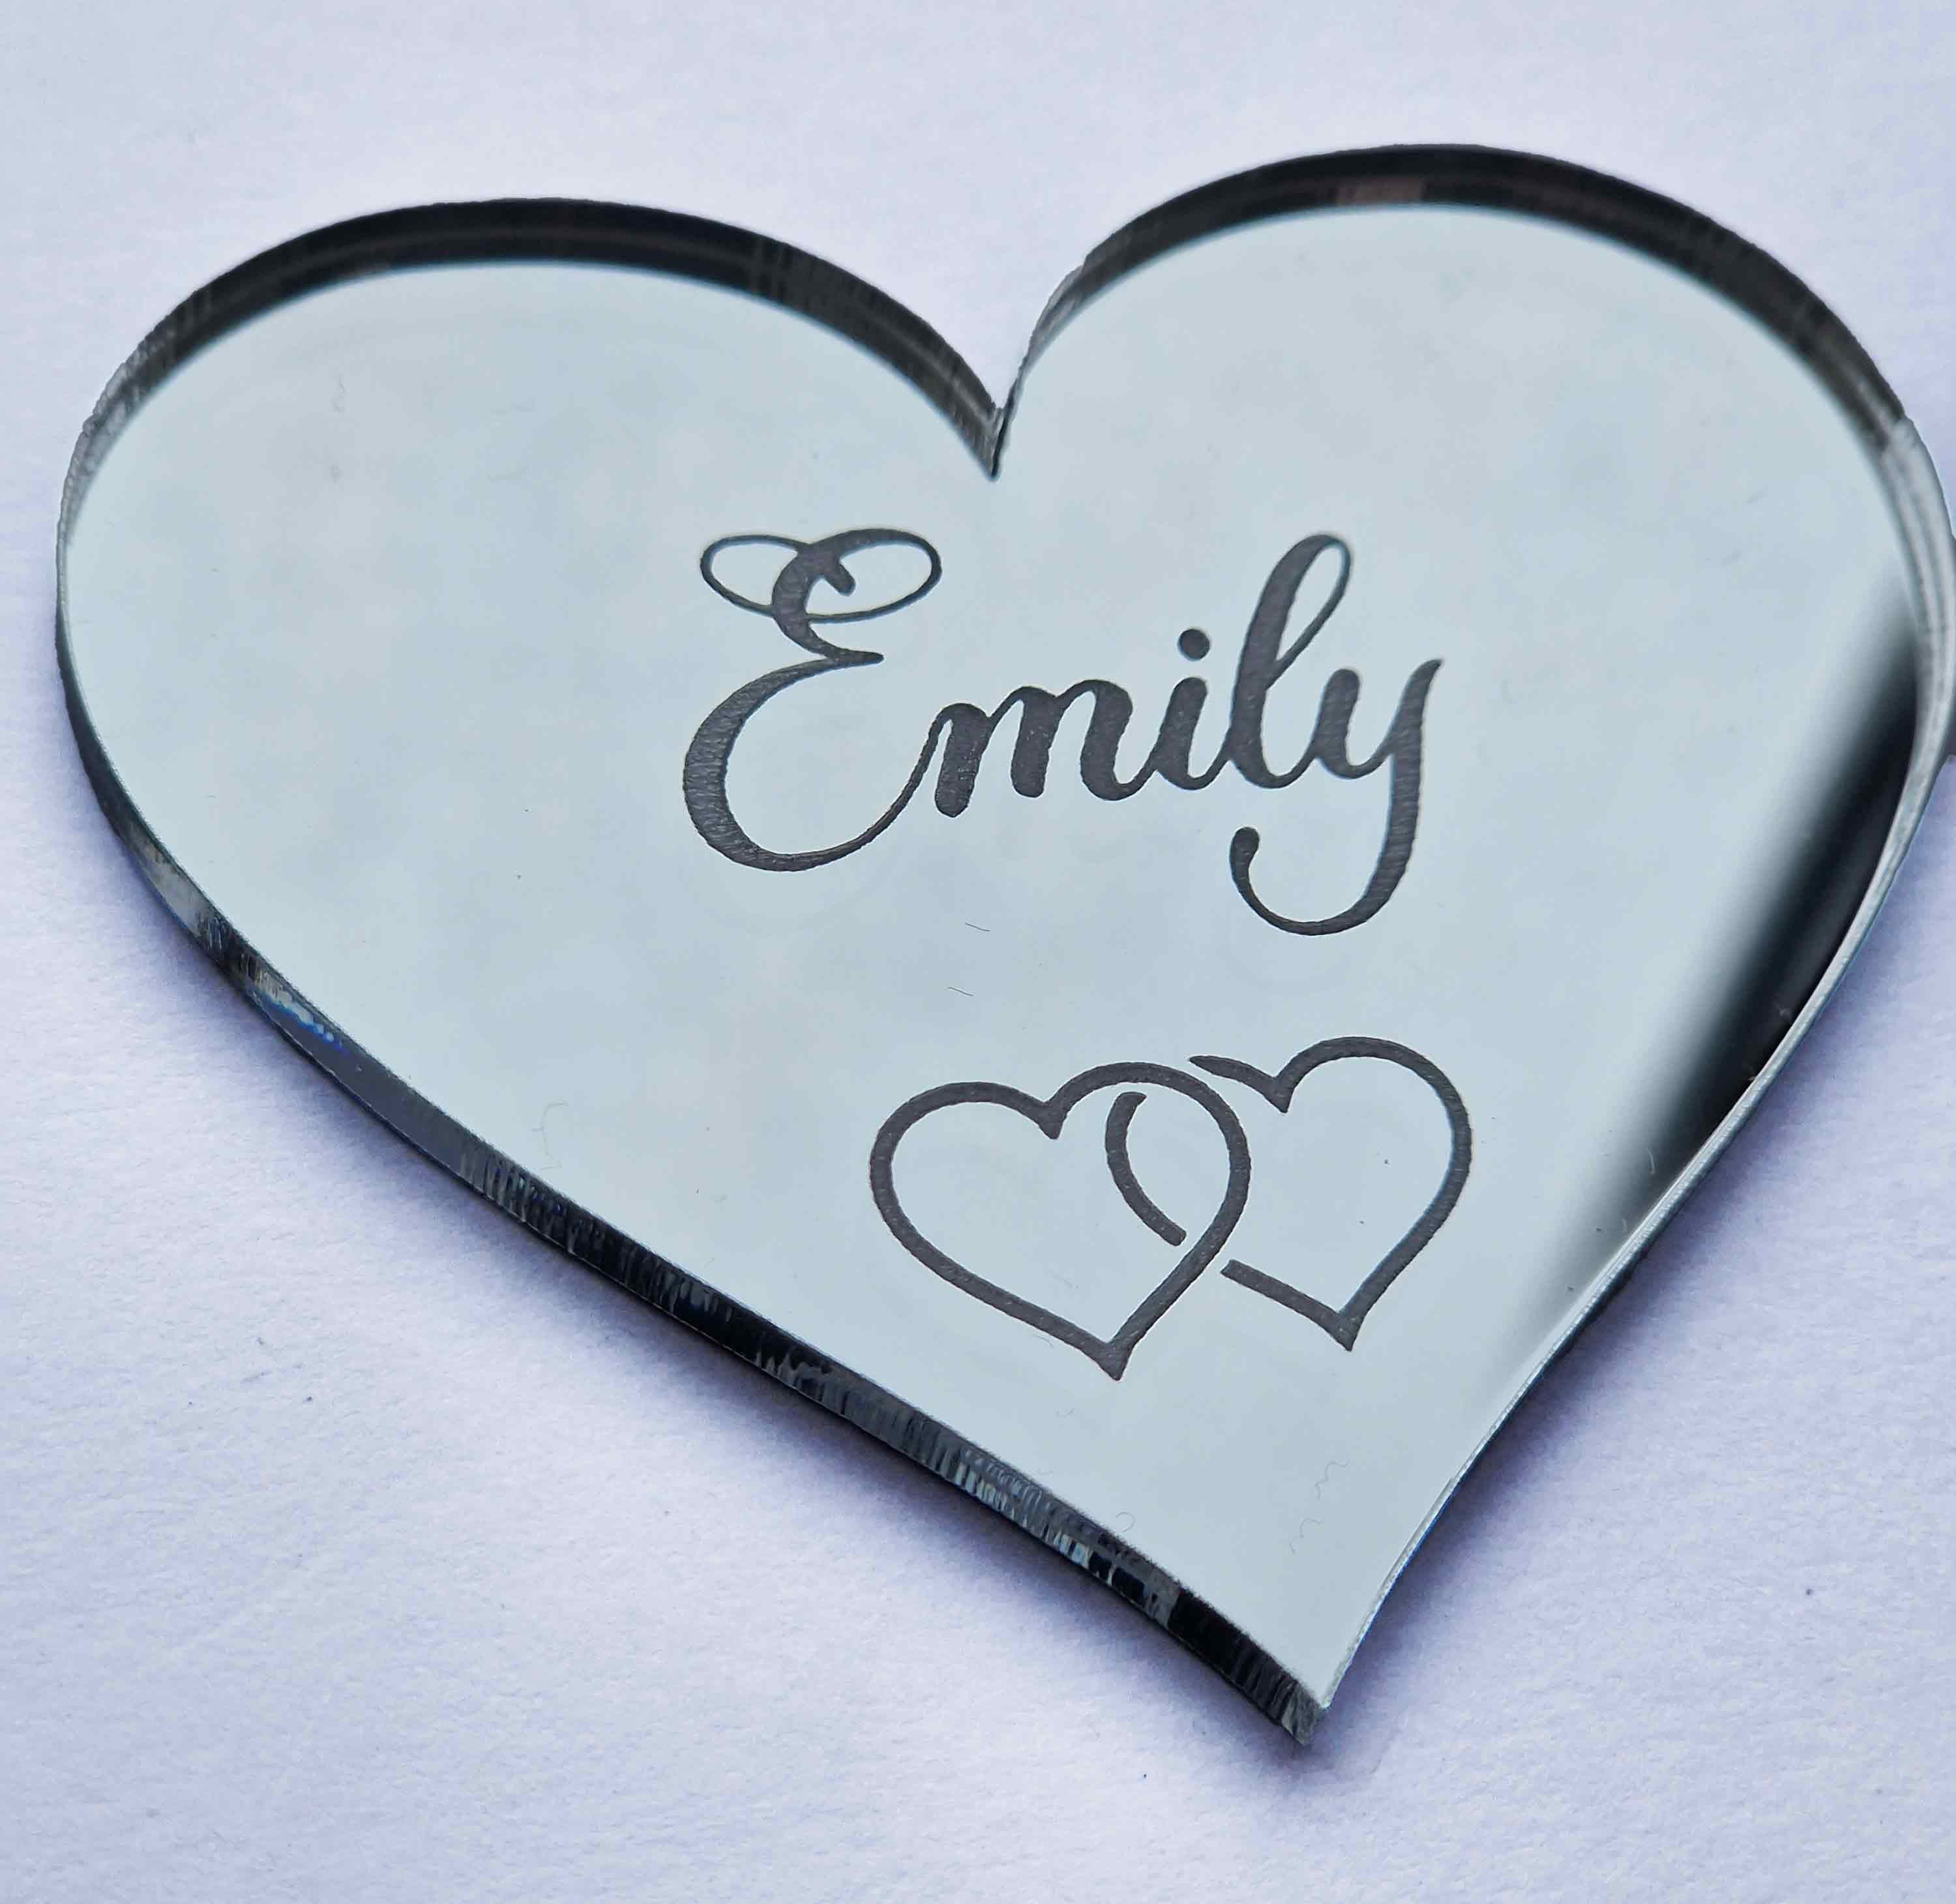 Heart Shaped Name Places For Weddings, Parties, Bridal Showers - Mirrored Place Cards Customised With Guest Names & Engraving